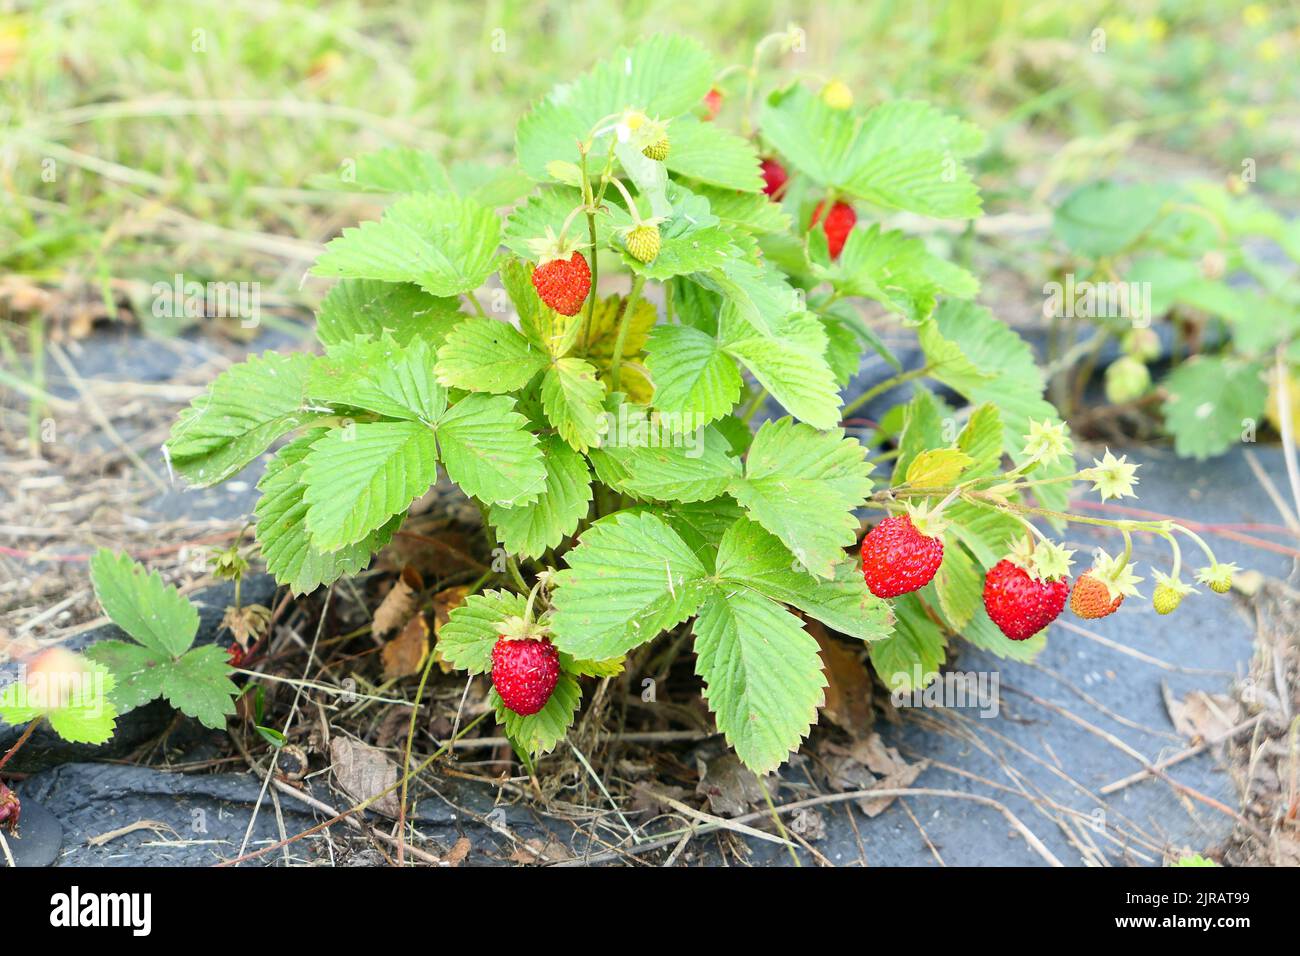 Wild strawberries ripe fruits on the plant growing in the garden Stock Photo